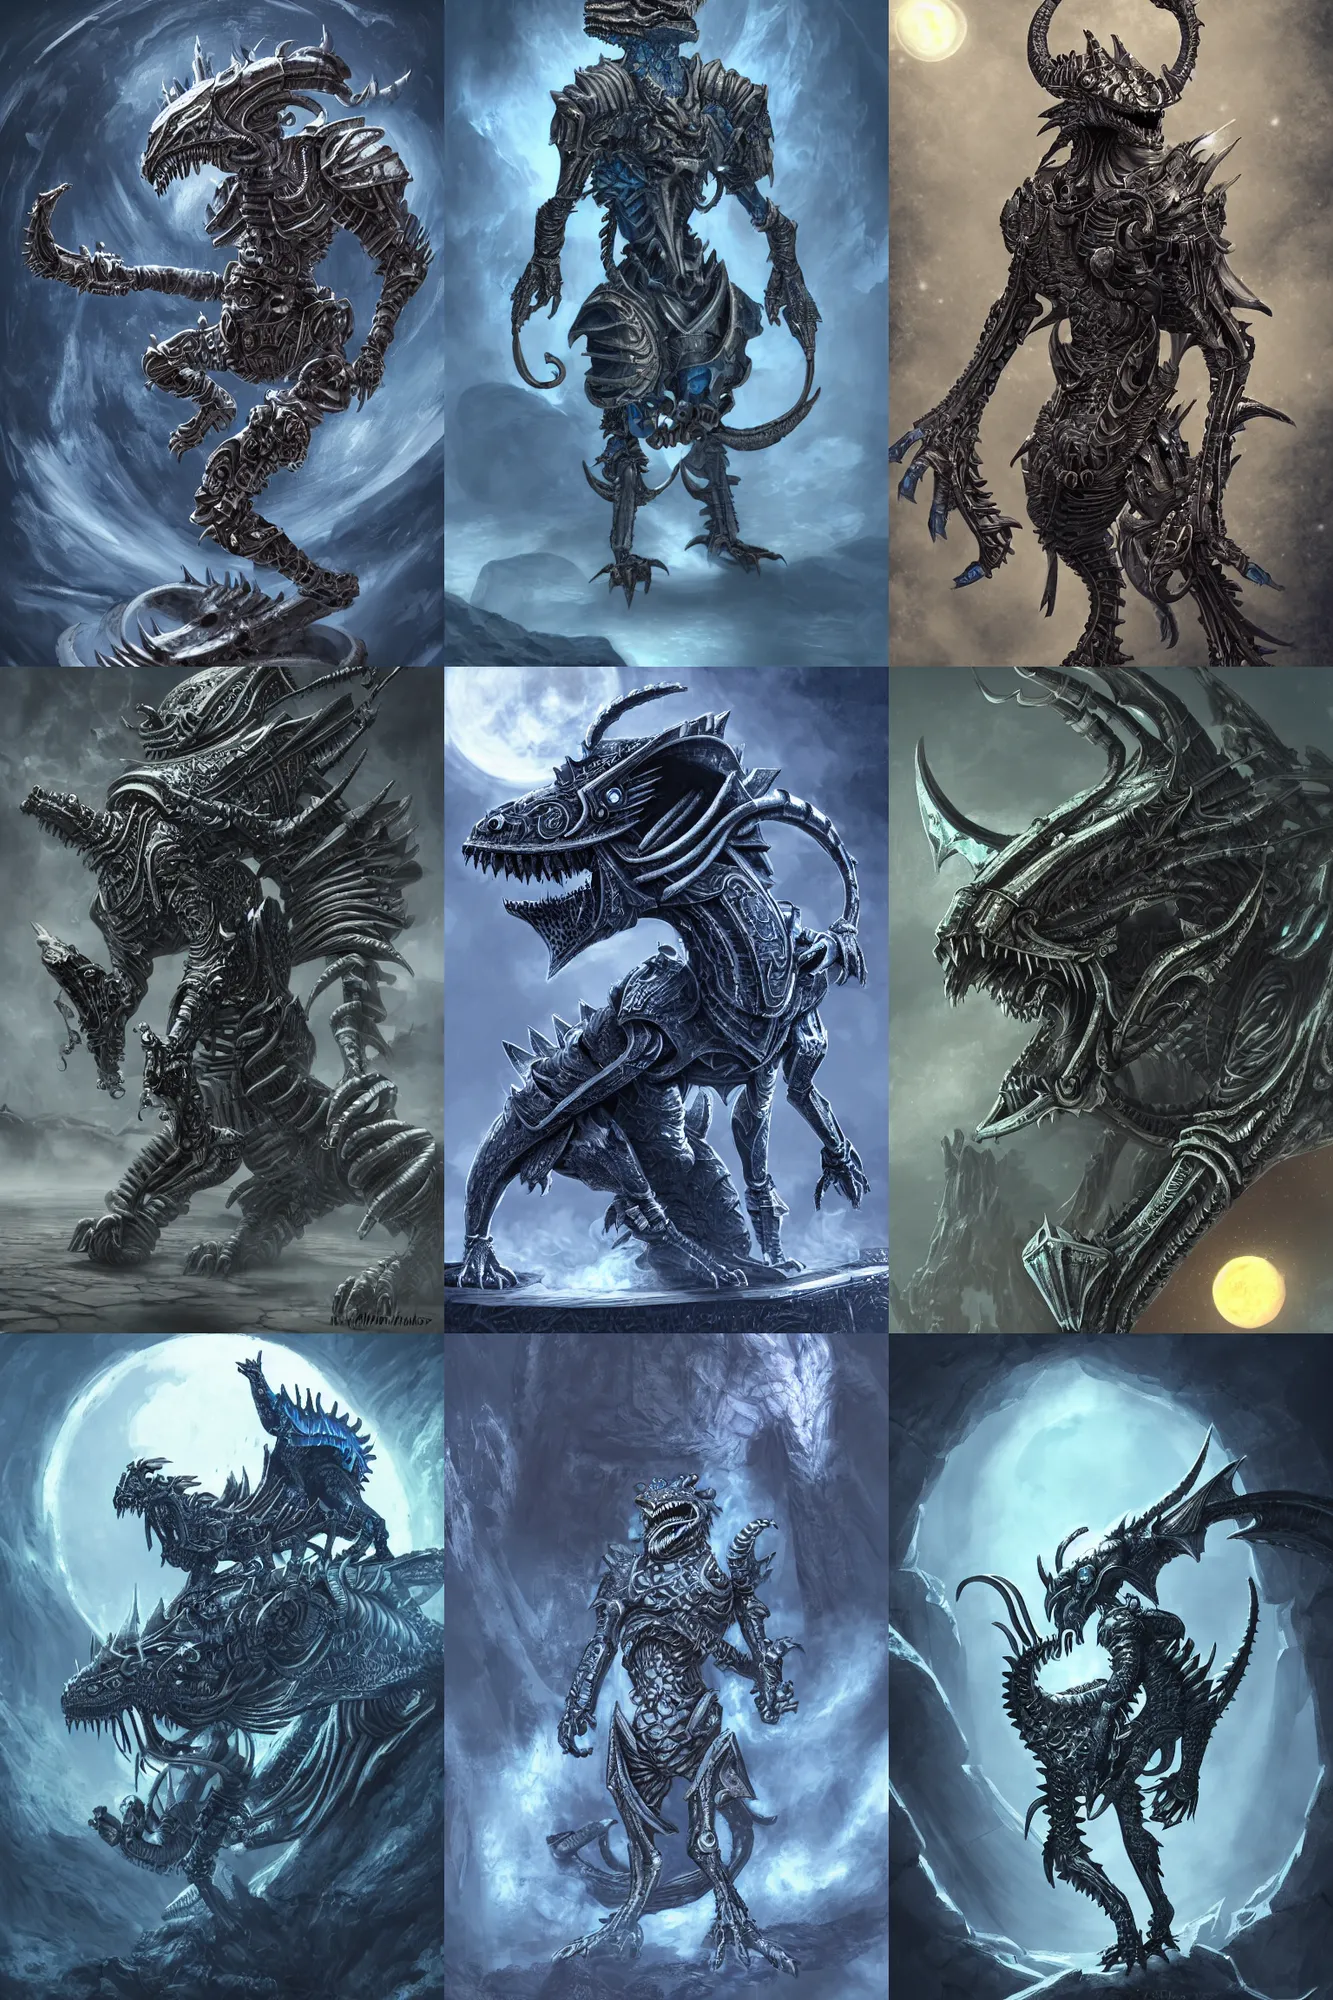 Prompt: snarling mechanical dragonborn with silver and blue color scheme standing in a smoking crater, biomechanical, highly detailed, intricate, full body single character, centered, moonlit night, good value control, high contrast, cinematic, illustration, concept art